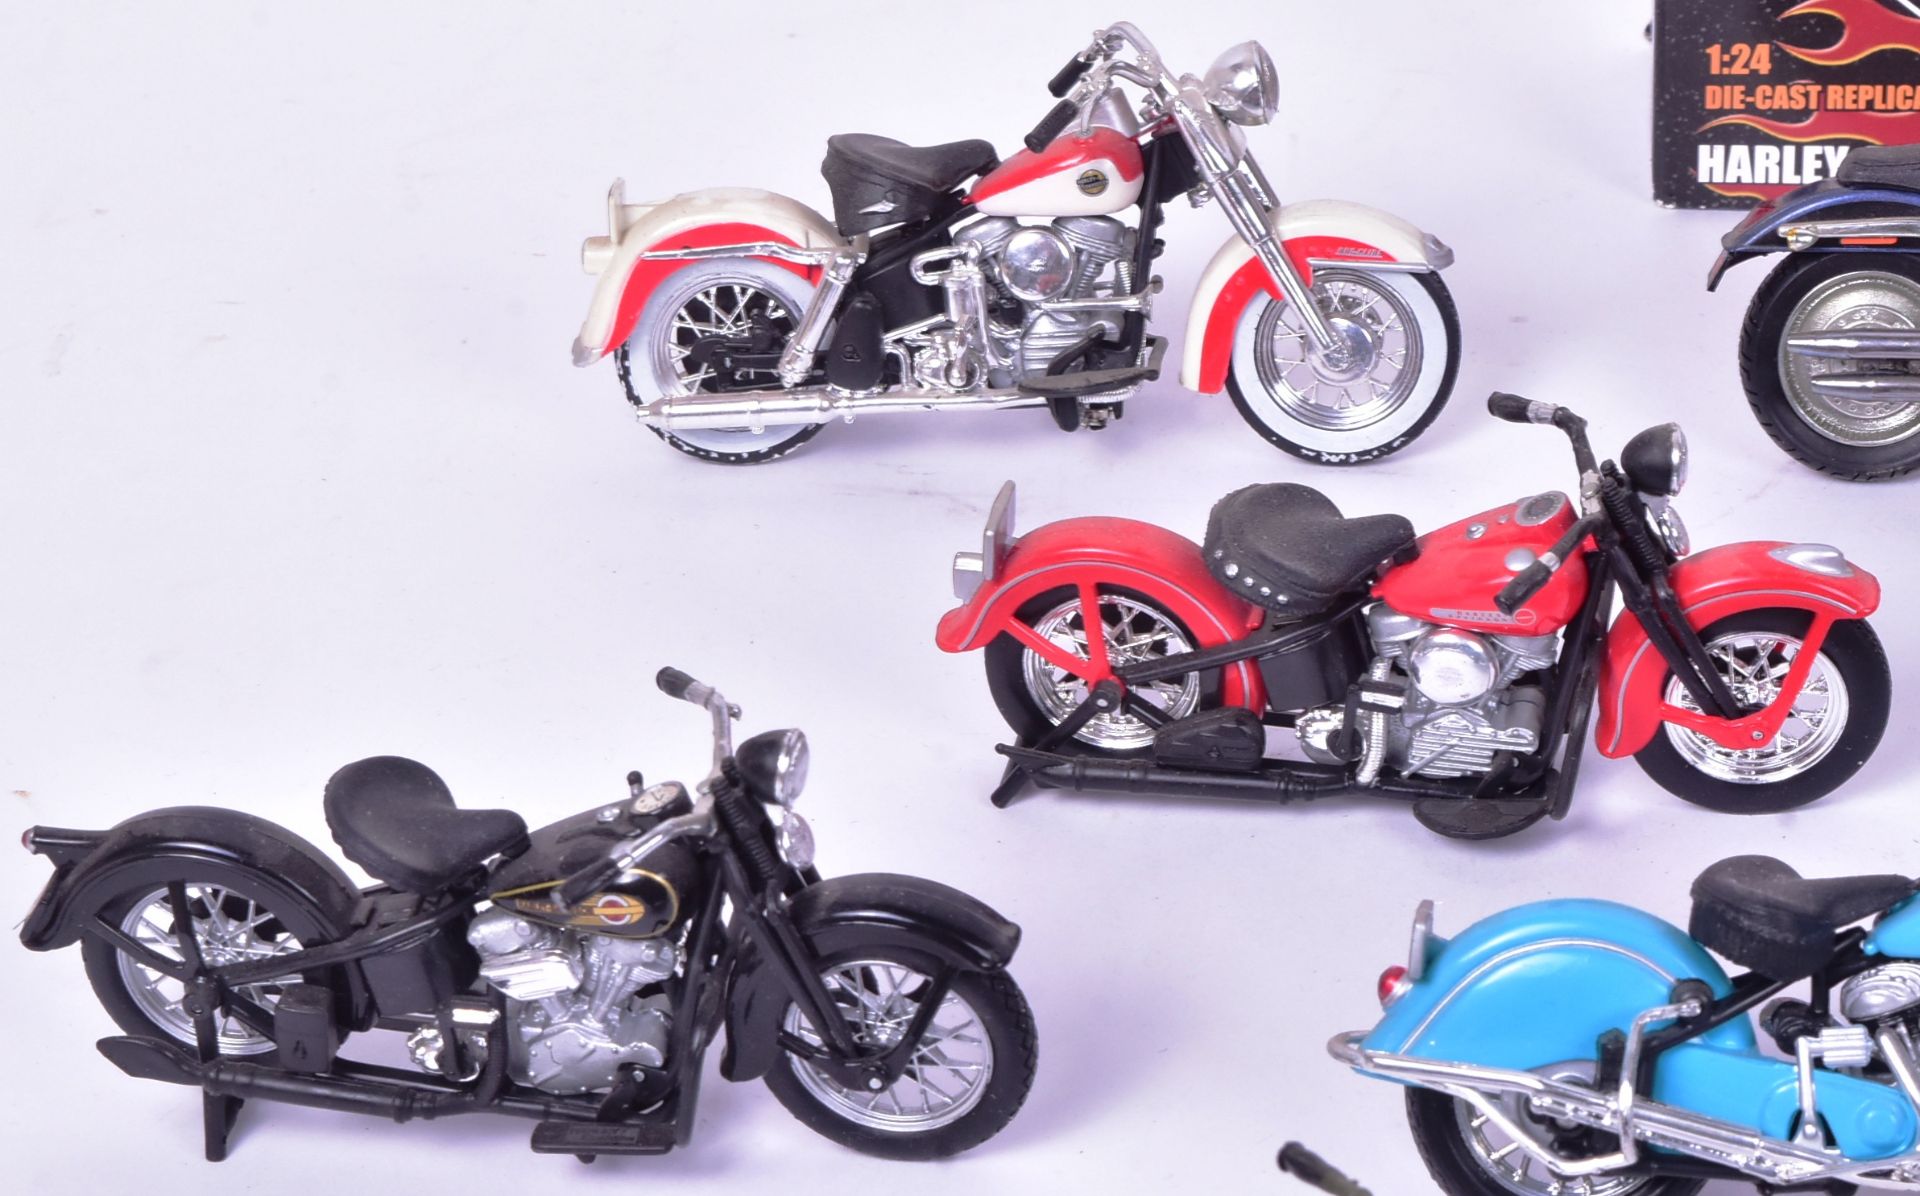 DIECAST - COLLECTION OF MOTORCYCLE MODELS - Image 4 of 7